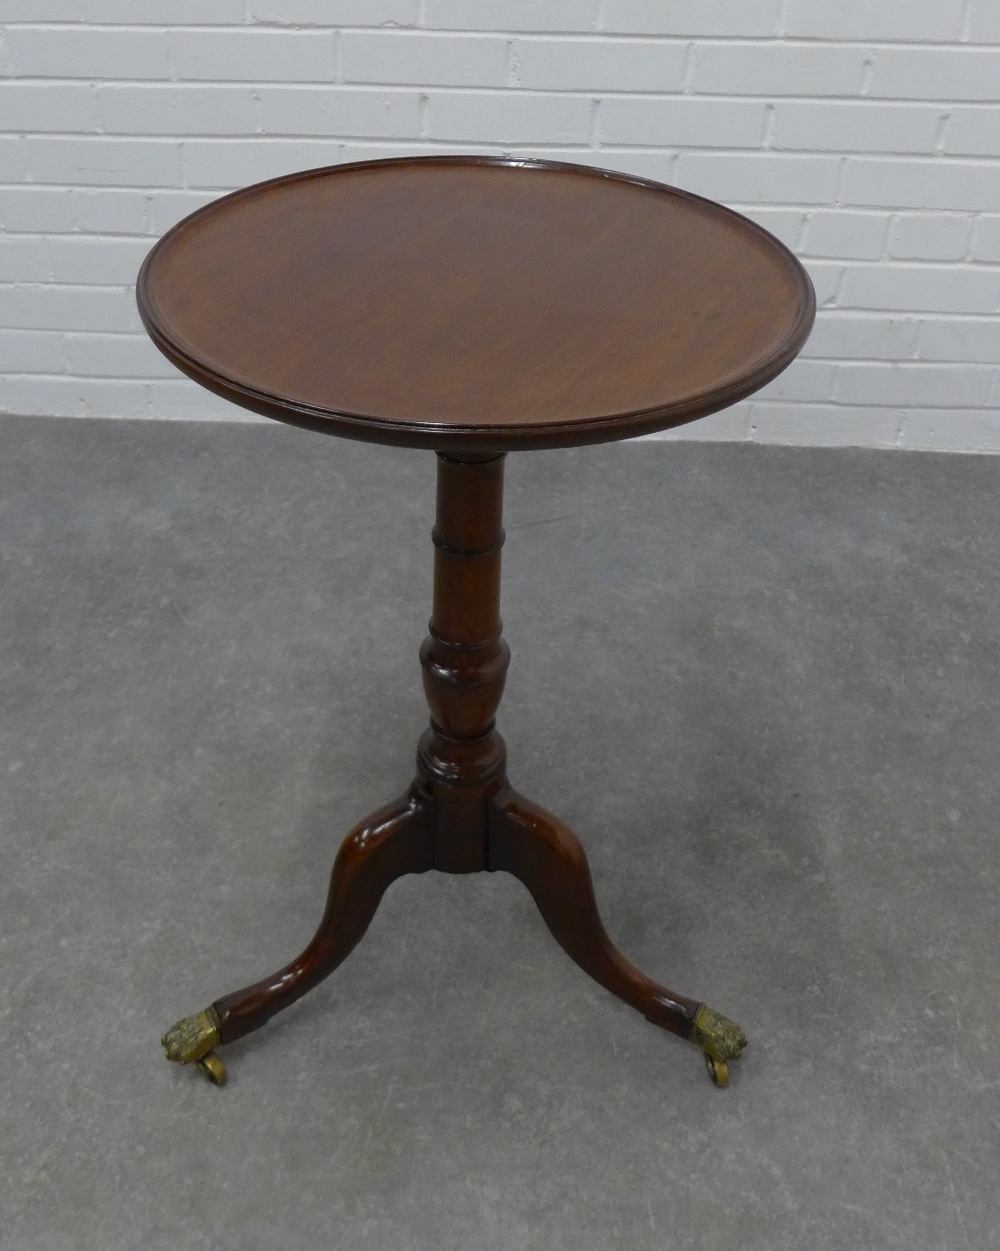 Mahogany pedestal table, the circular dished top on a baluster turned column and tripod legs with